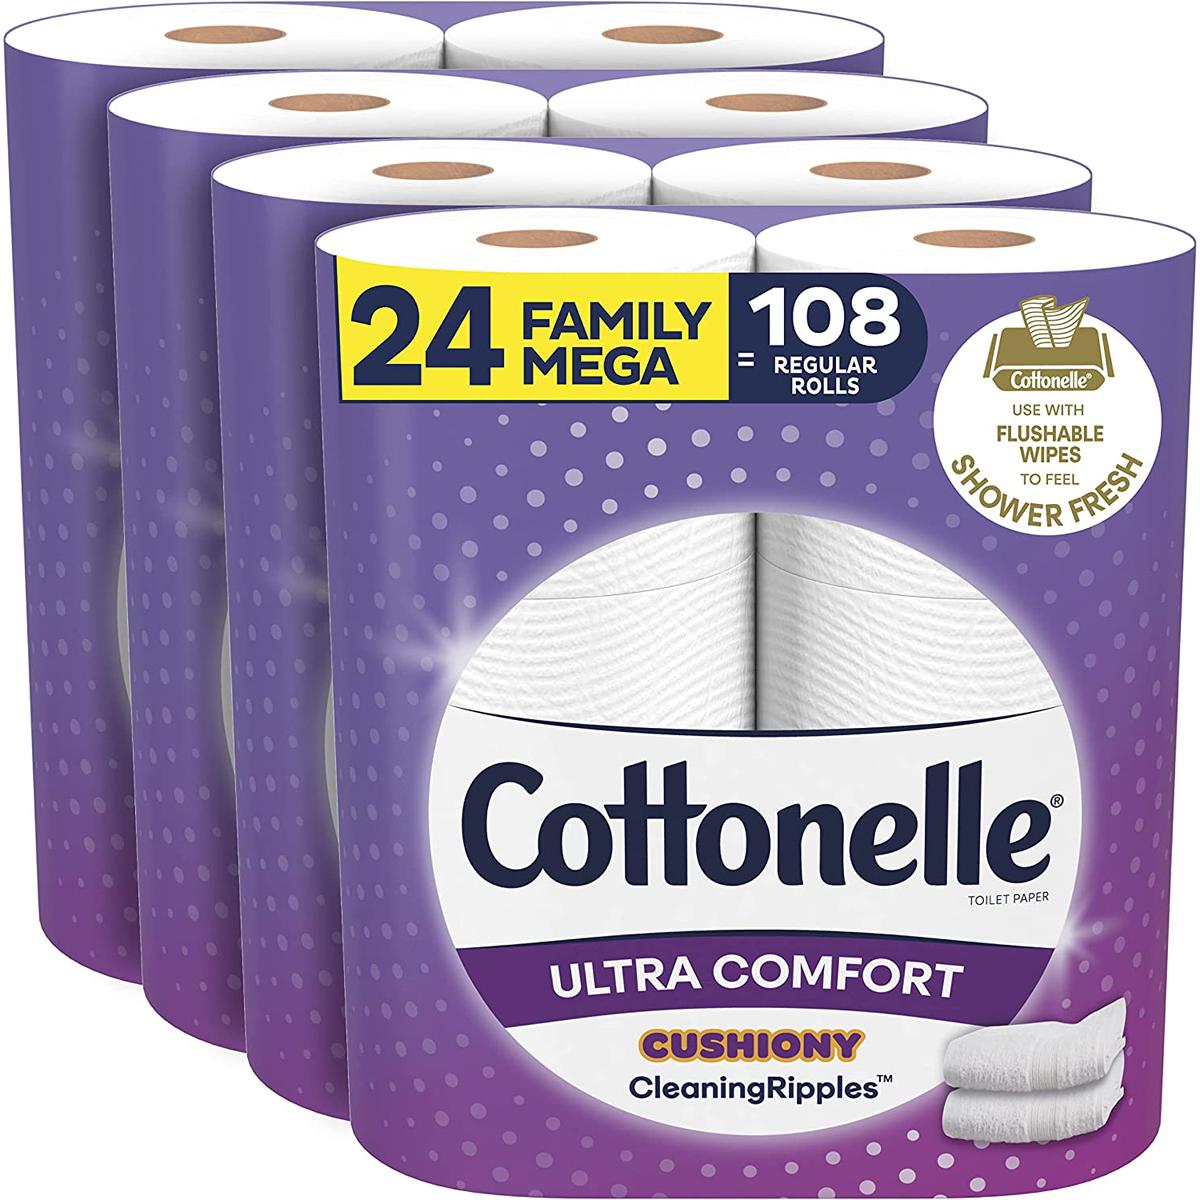 24 Cottonelle Ultra Comfort Toilet Paper Rolls for $19.95 Shipped